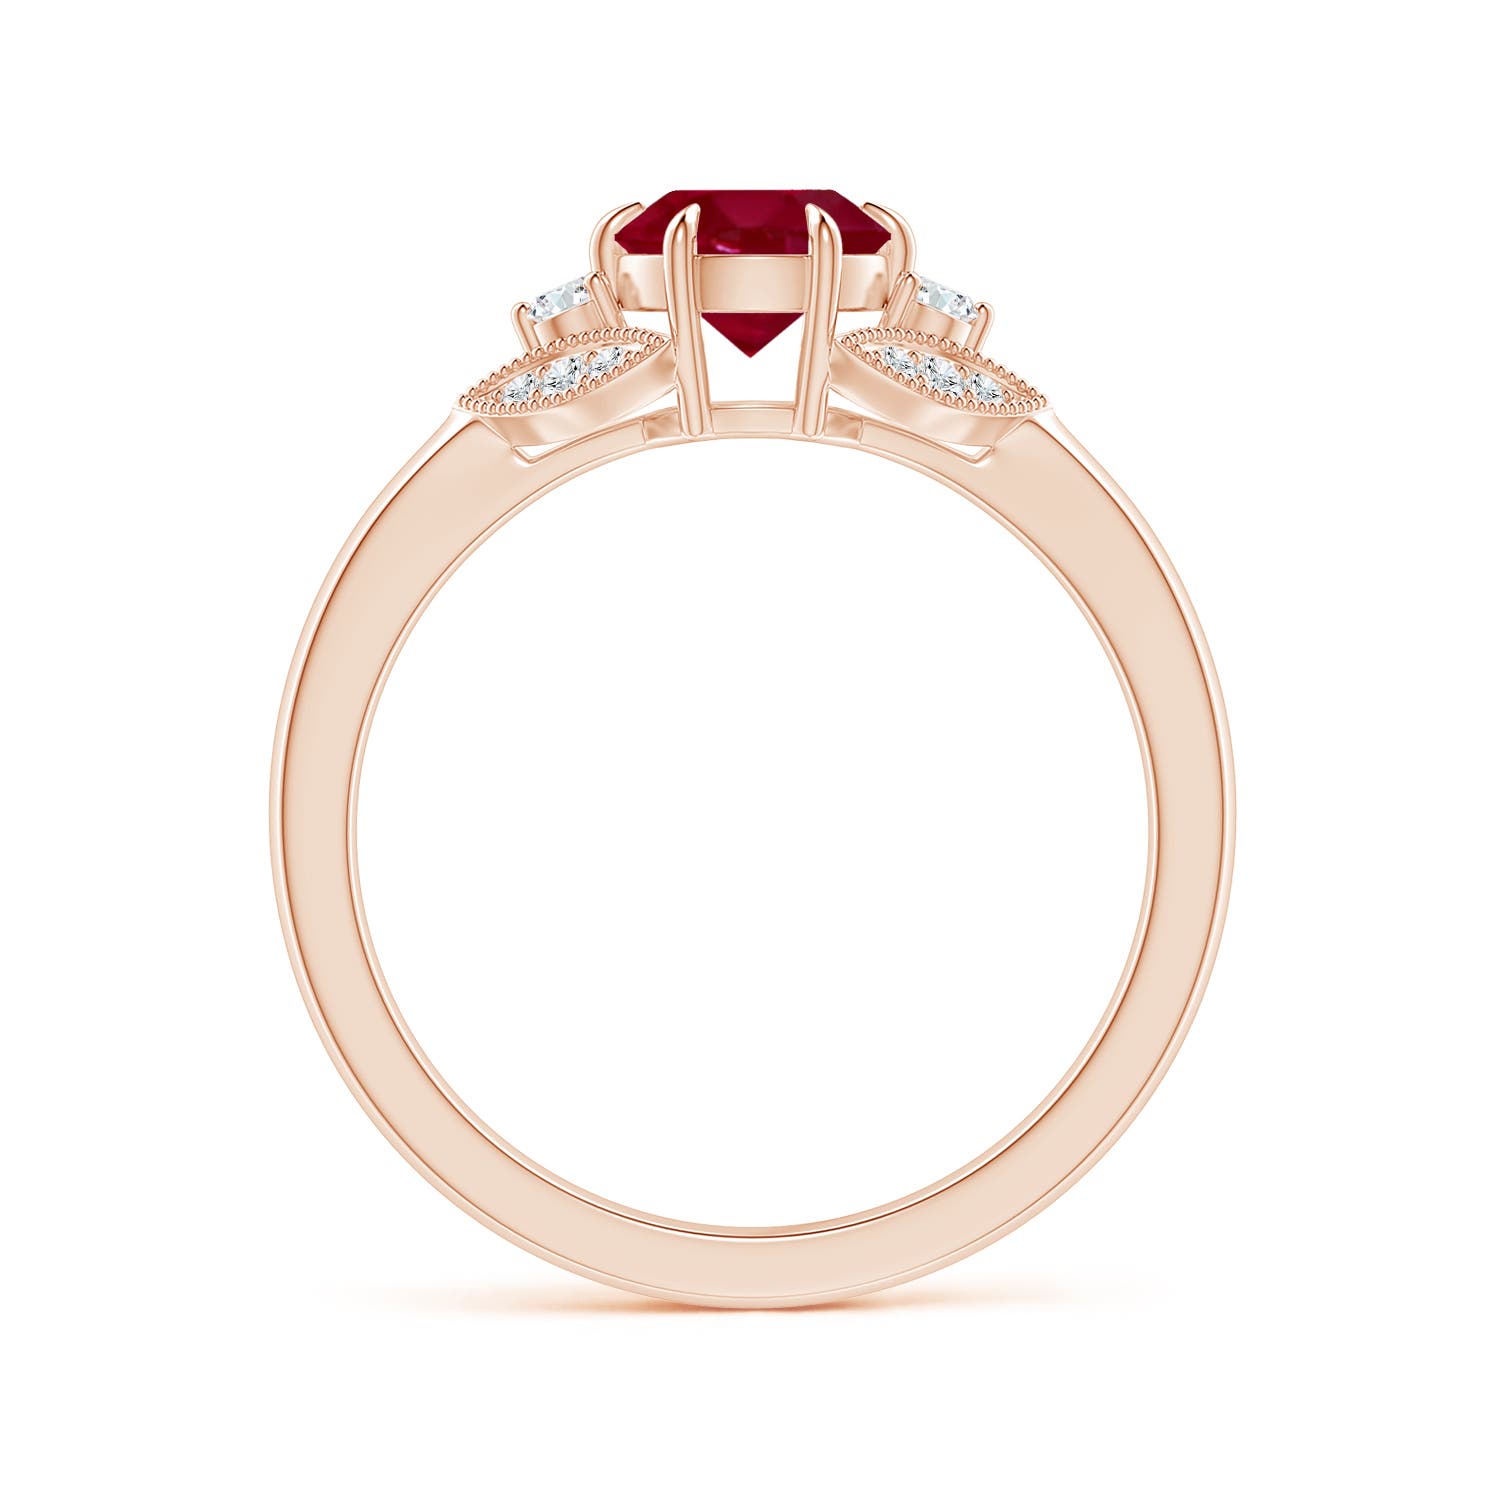 AA - Ruby / 1.1 CT / 14 KT Rose Gold